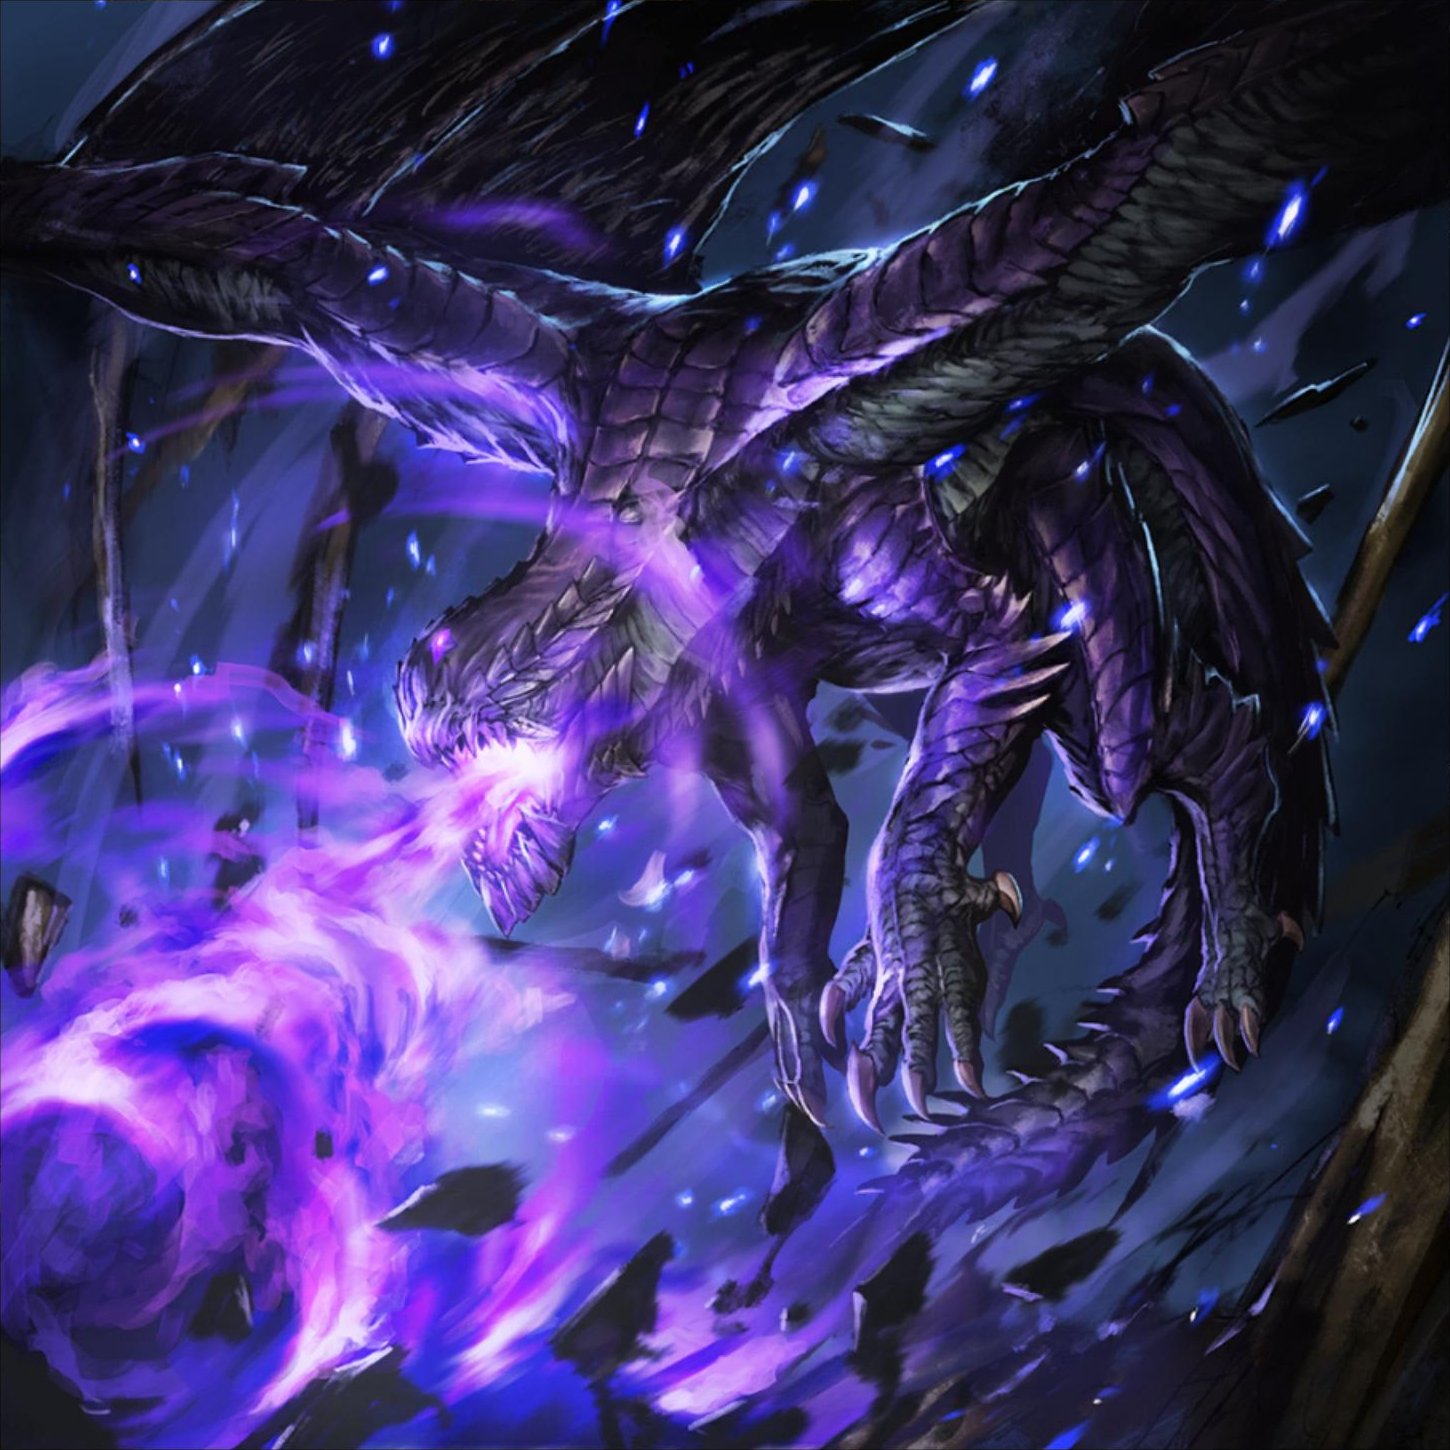 Kogath Gore Magala unit card from this update looks really nice, but it's kinda hard to notice the mind control stone on it. Too much purple